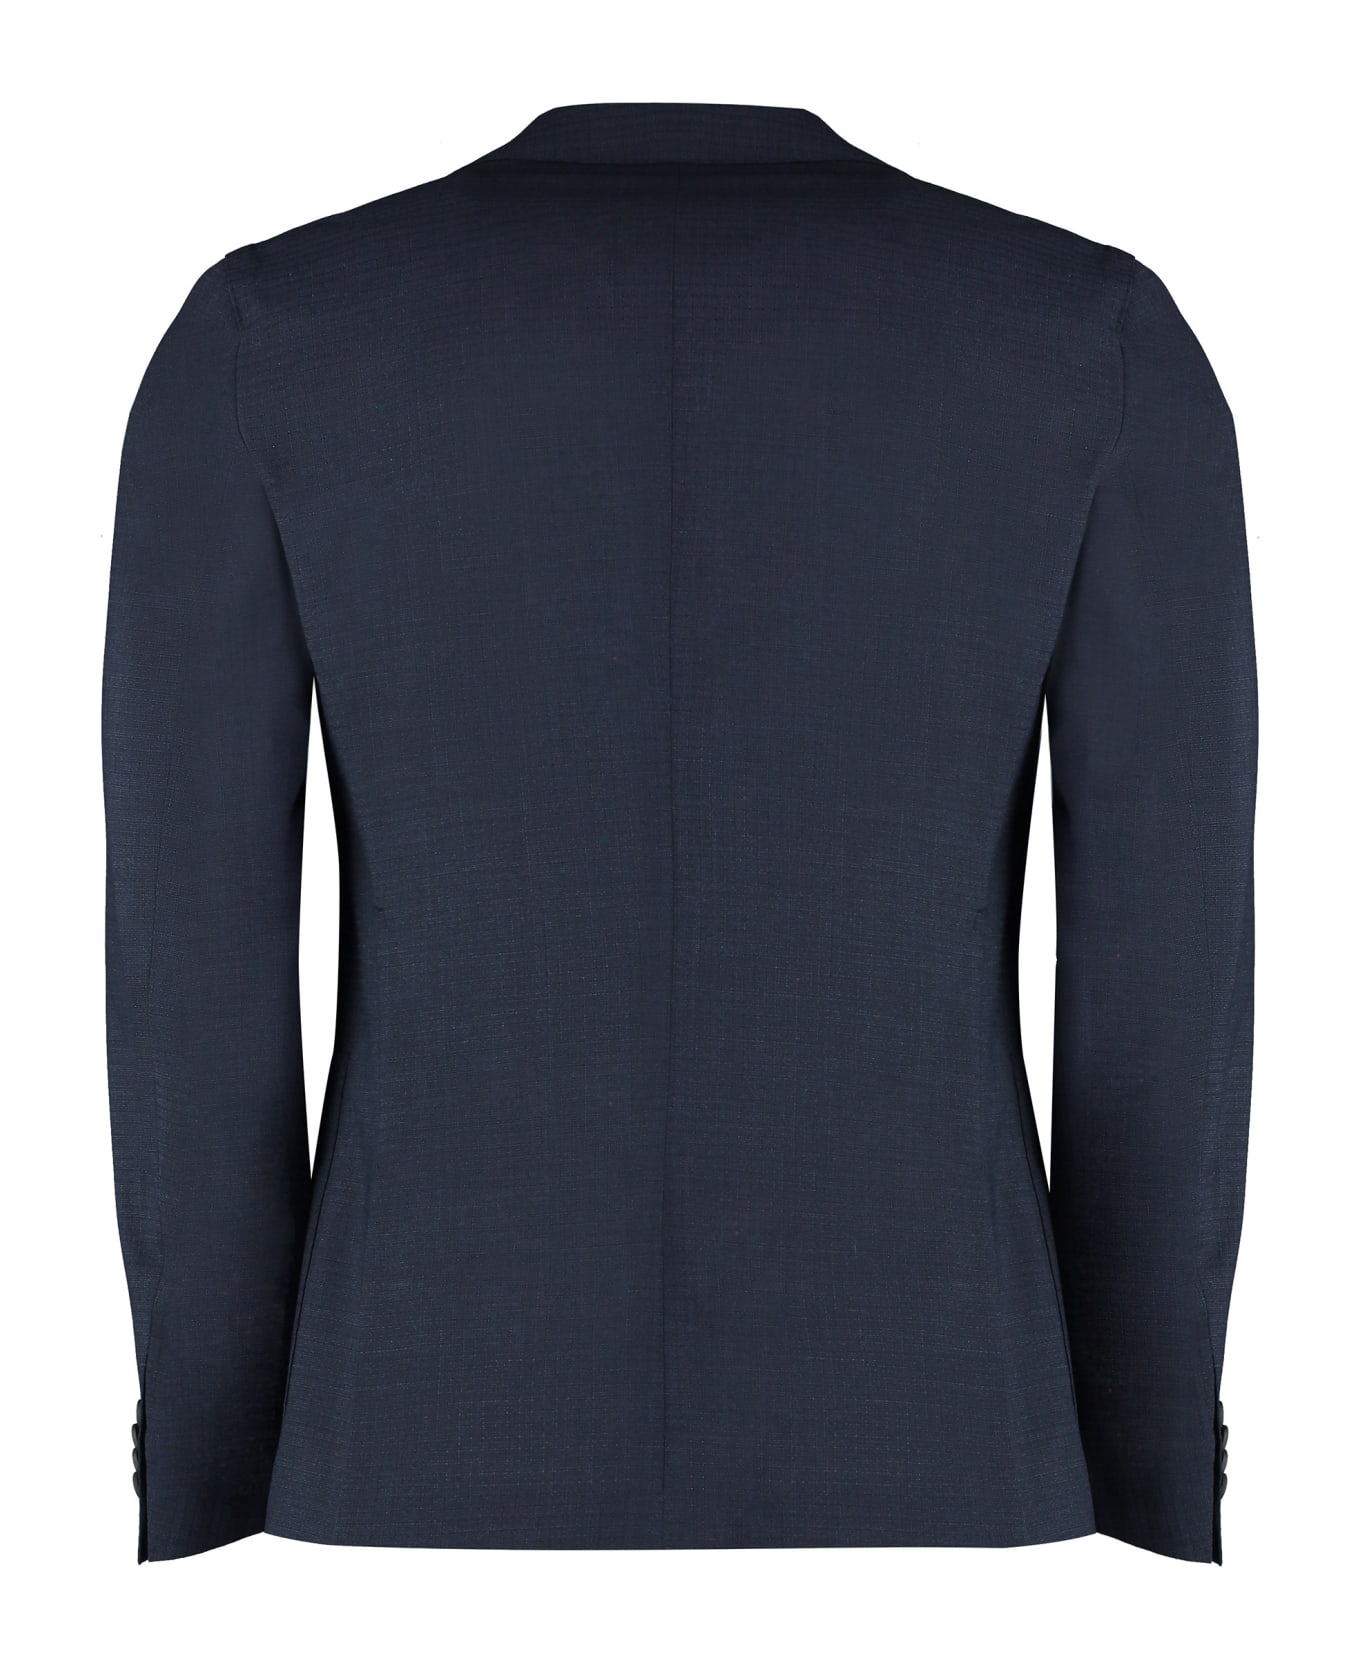 Hugo Boss Mixed Wool Two-pieces Suit - blue スーツ